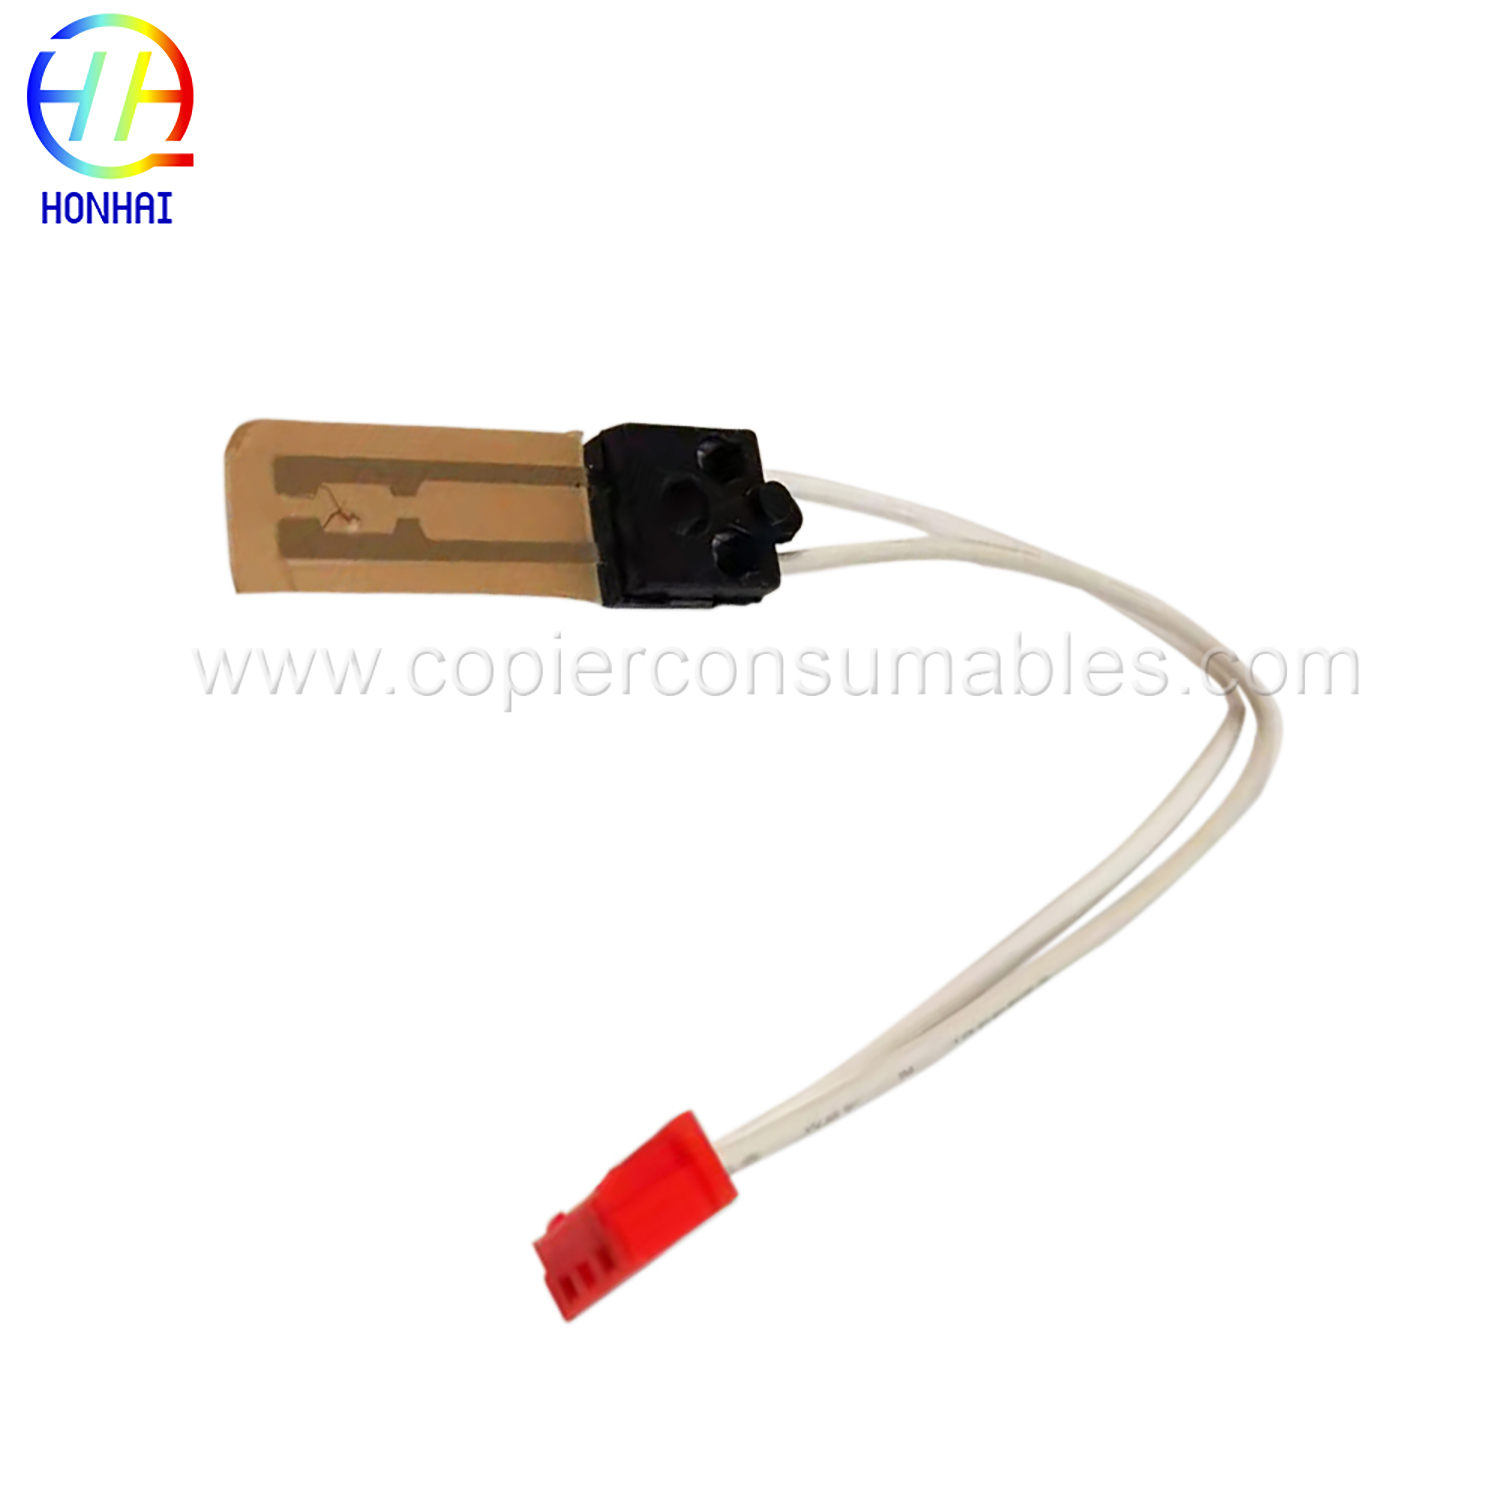 Fuser Thermistor for Ricoh 1022 1027 2022 2027 2032 3025 3030 MP2510 MP2550 MP2851 MP3010 MP3351 AW100053 (5)